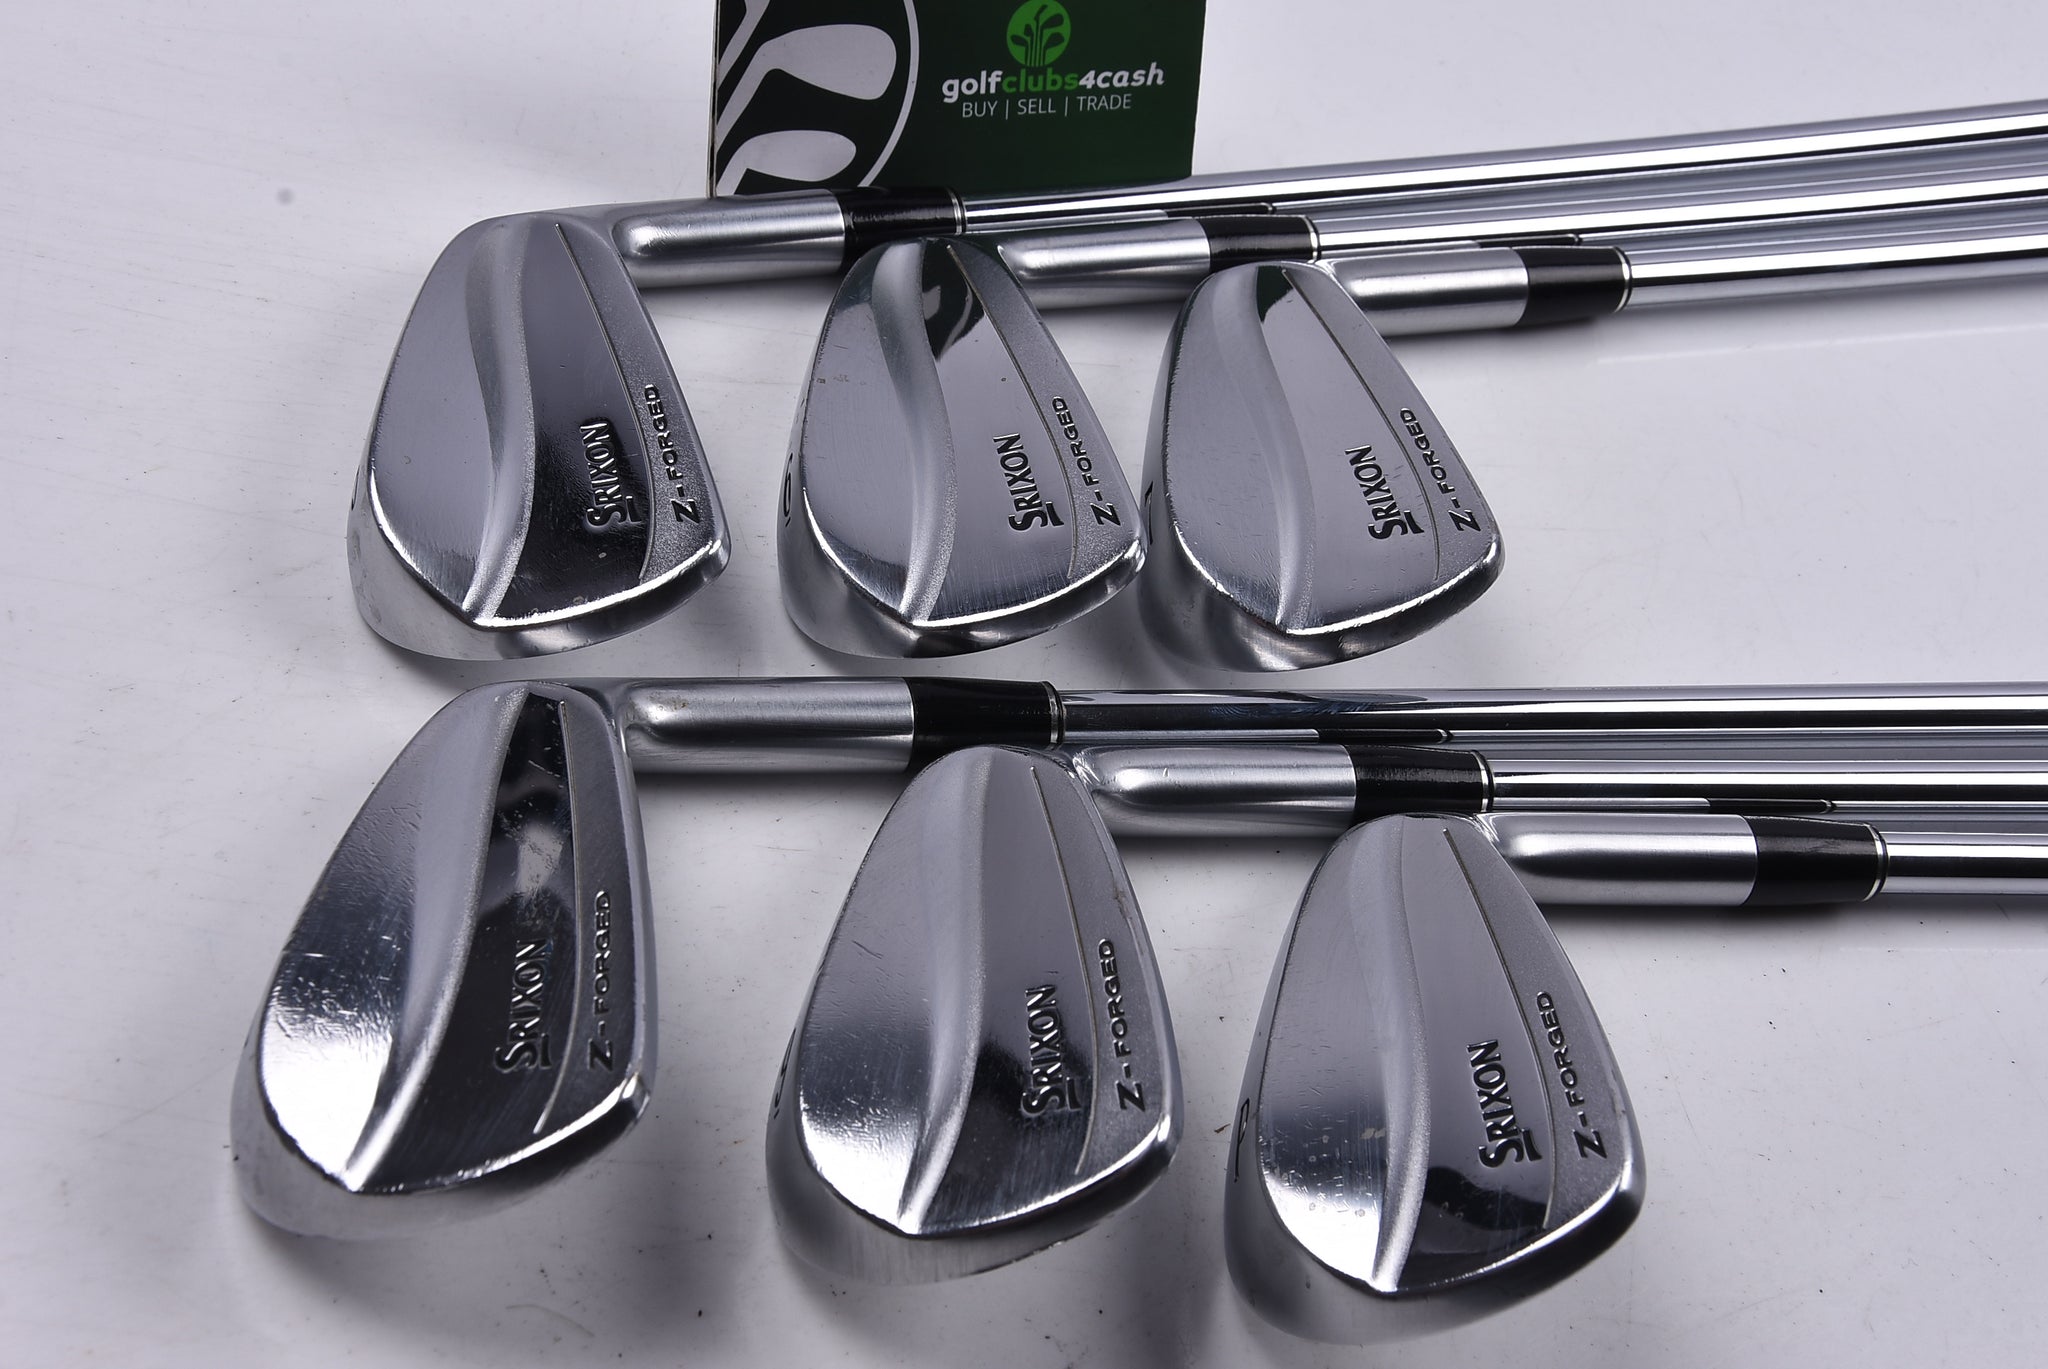 Srixon Z-Forged Irons / 5-PW / X-Flex Rifle Frequency Matched Shafts